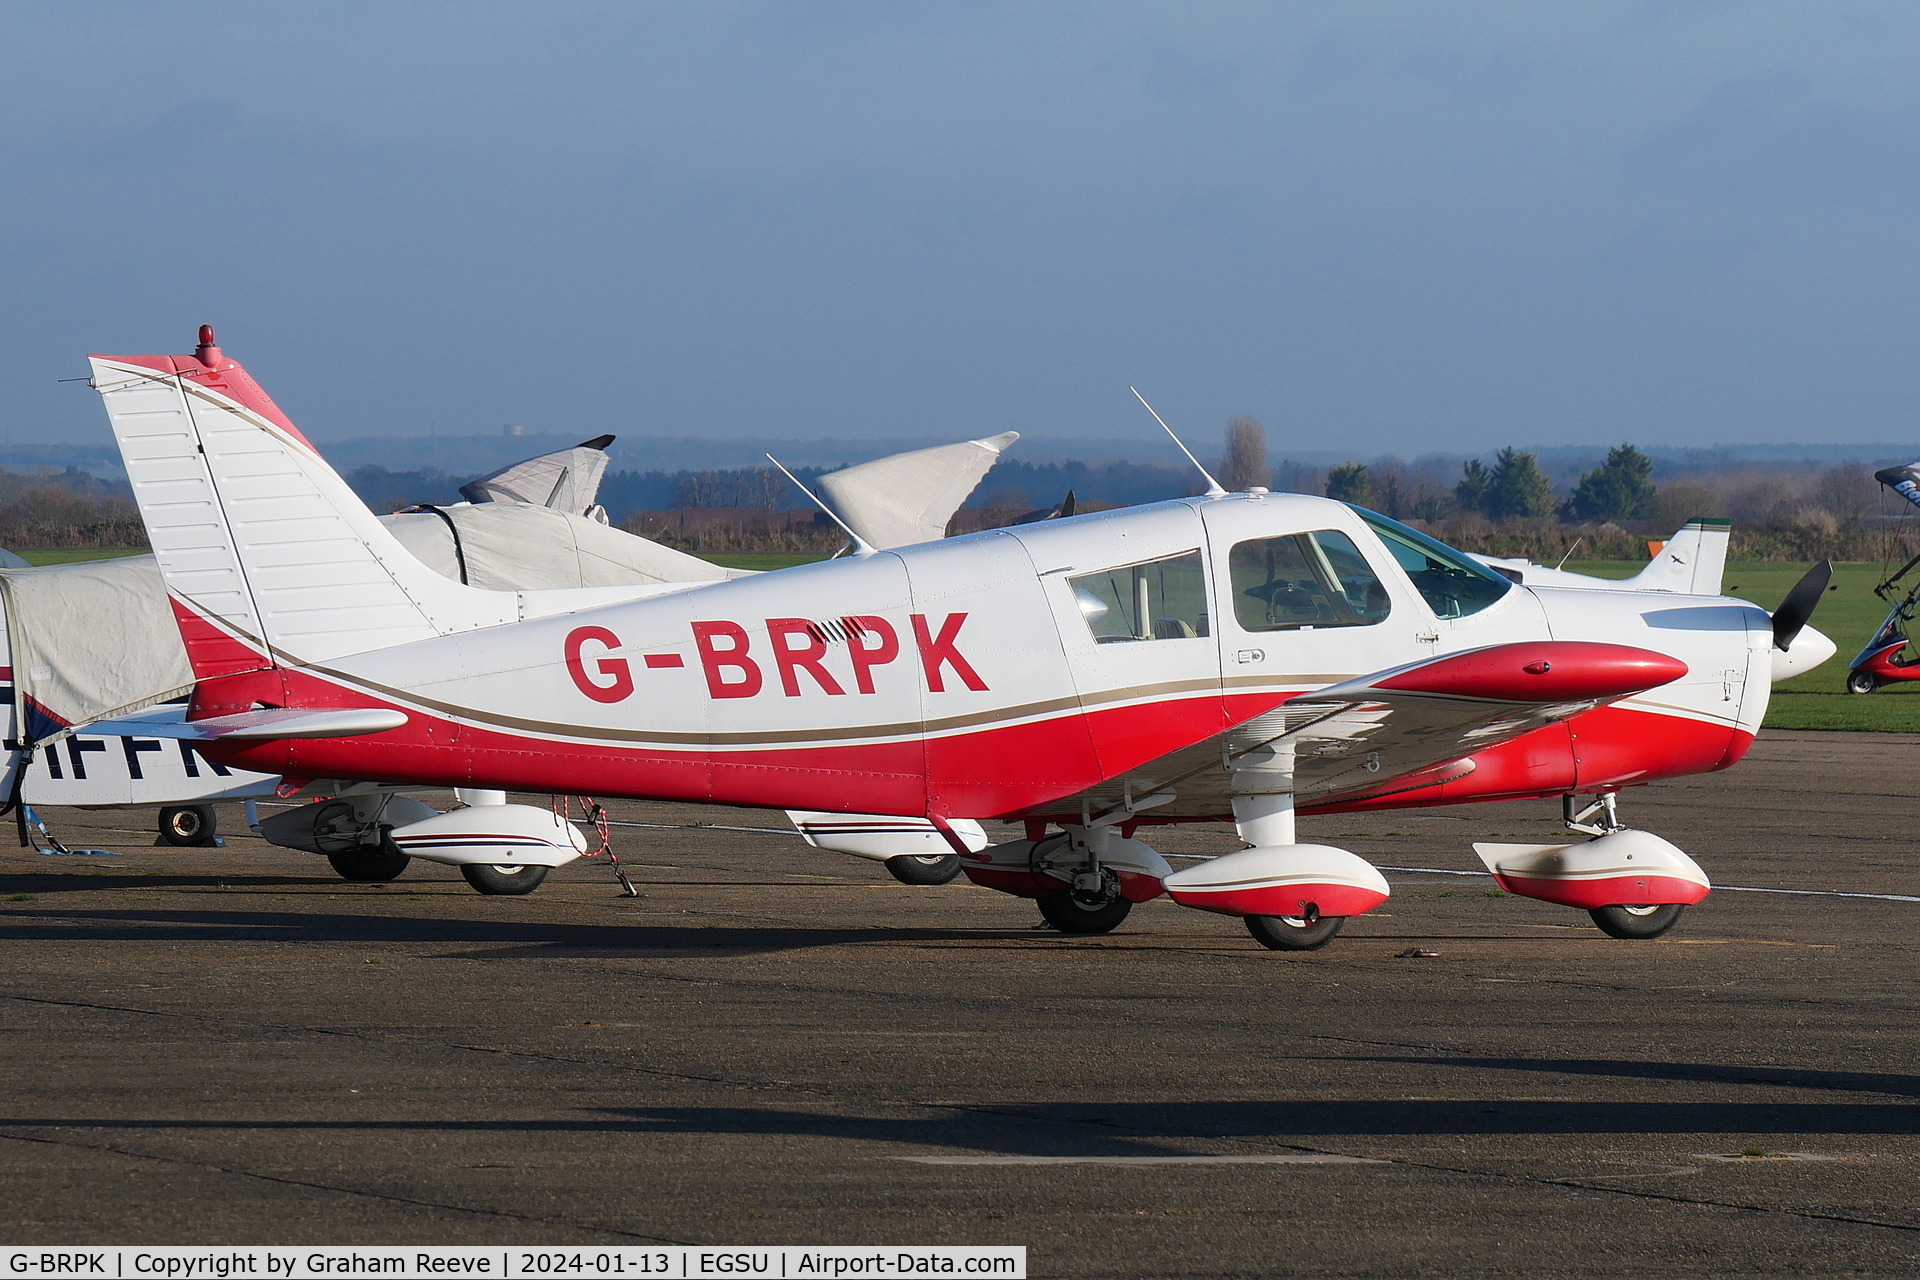 G-BRPK, 1972 Piper PA-28-140 Cherokee C/N 28-7325070, Parked at Duxford.